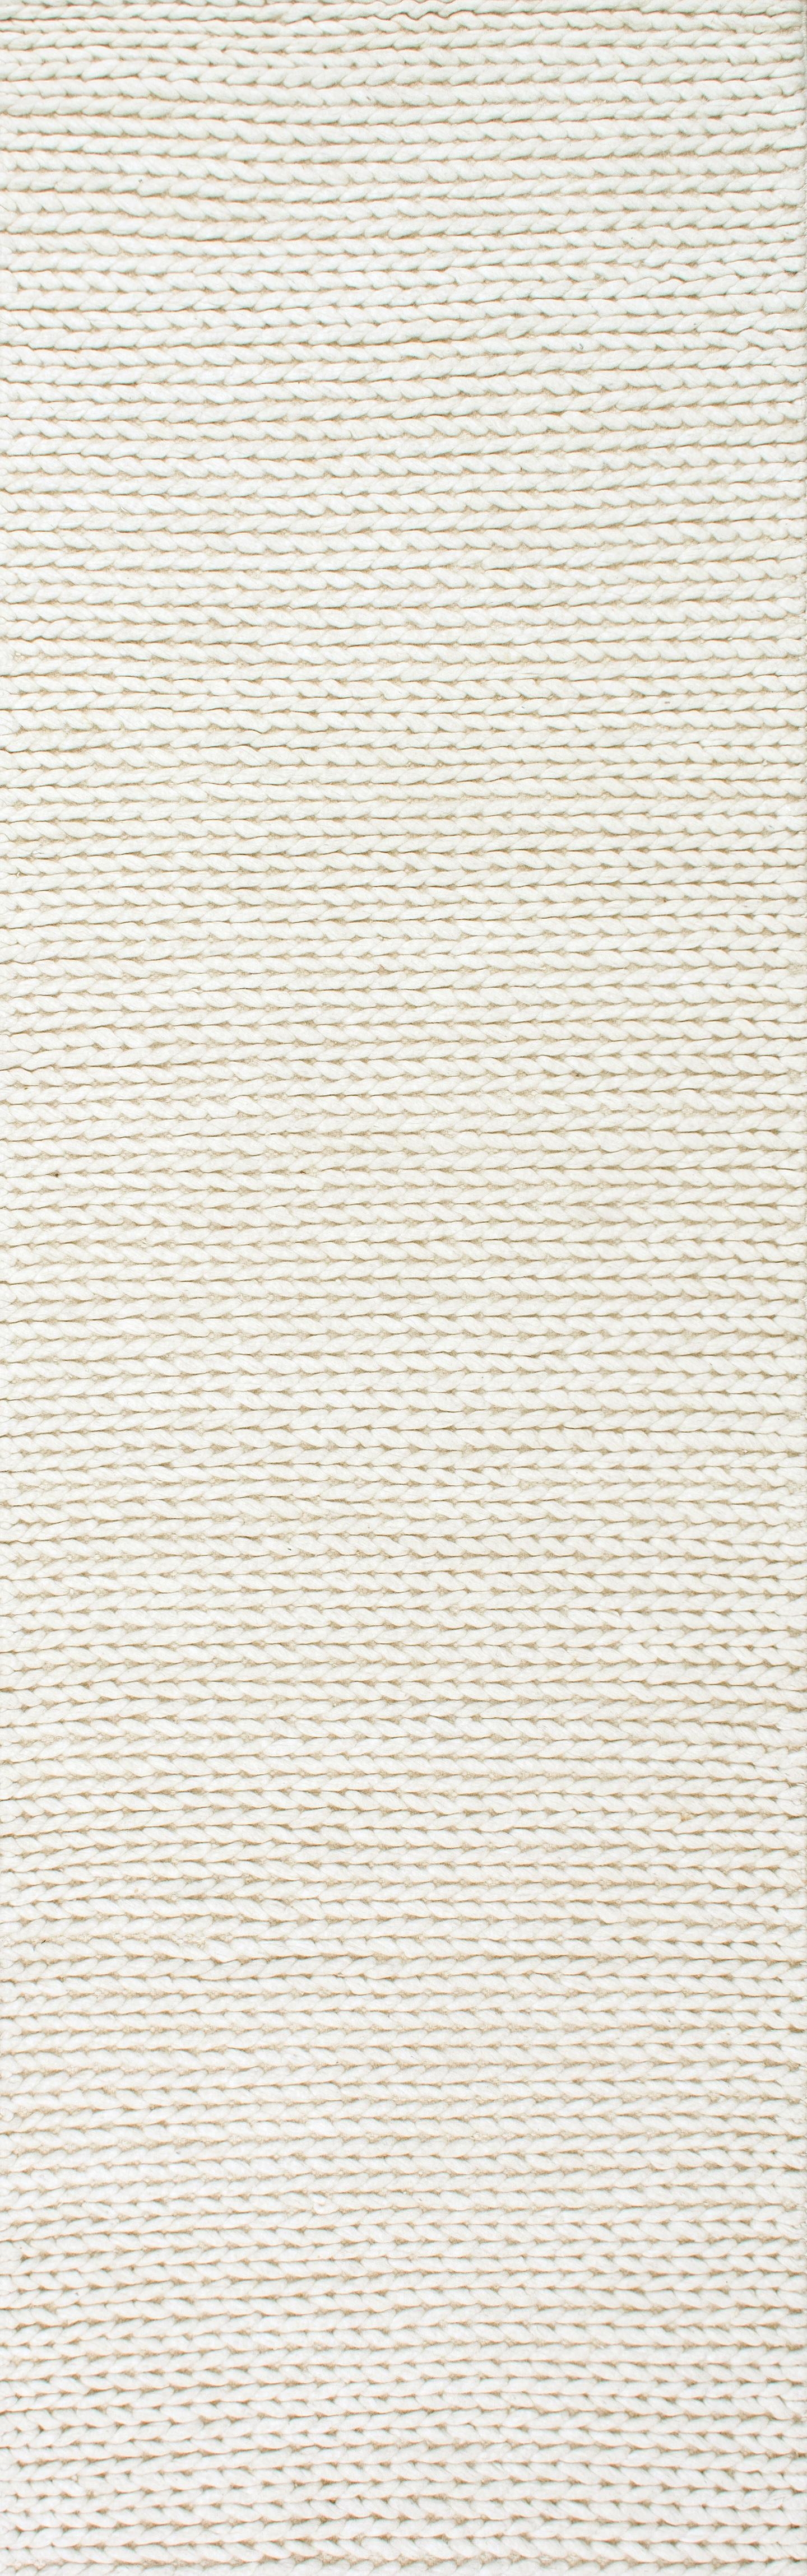 Hand Woven Chunky Woolen Cable Rug Area Rug - Image 4